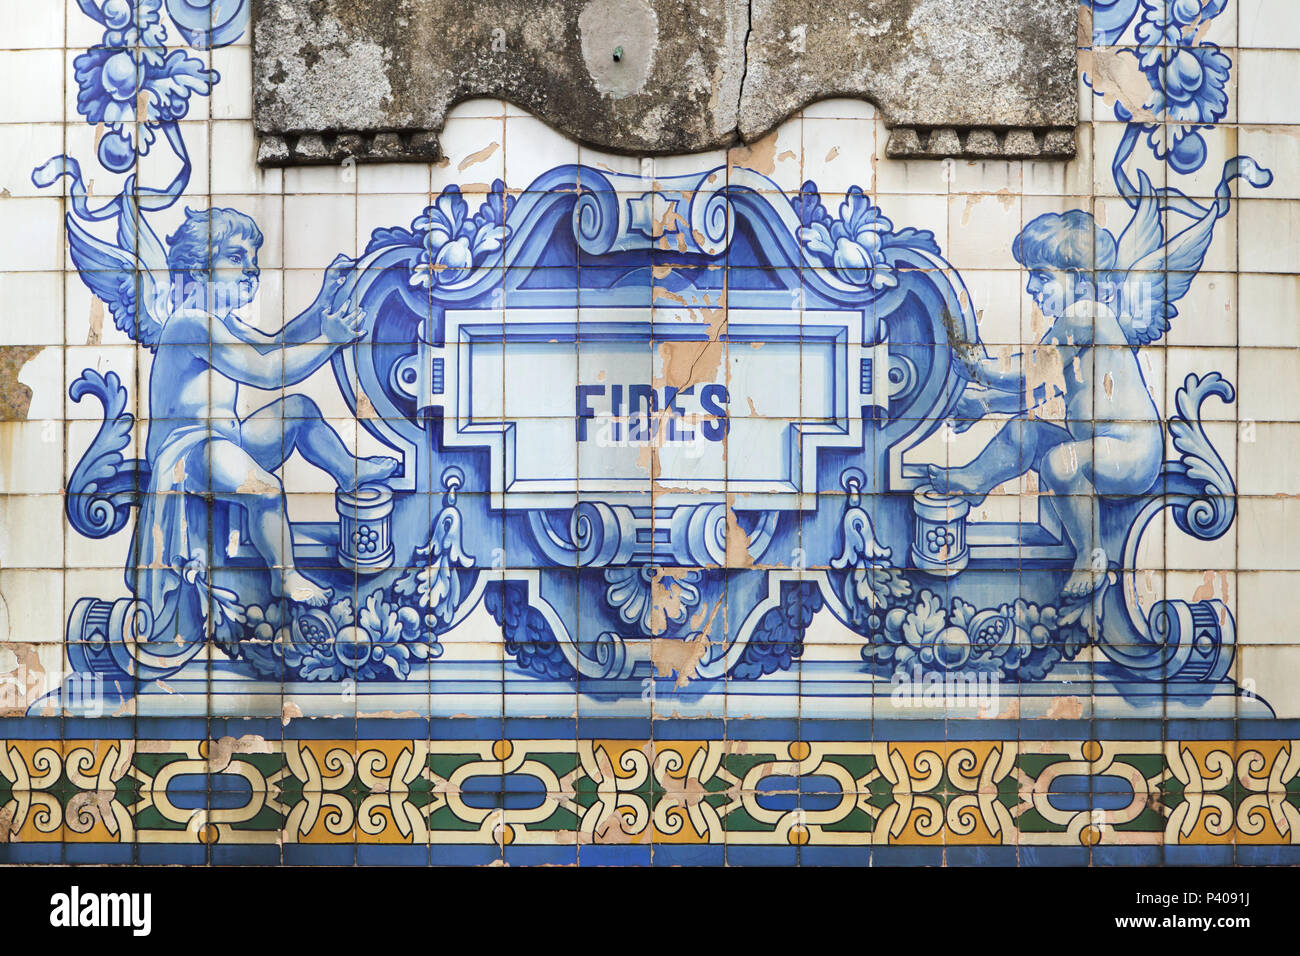 Putti depicted in the azulejo tiles painted by Portuguese painter Jorge Colaço (1932) on the main facade of the Church of Saint Ildefonso (Igreja de Santo Ildefonso) in Porto, Portugal. Fides means Faith in Latin. Stock Photo